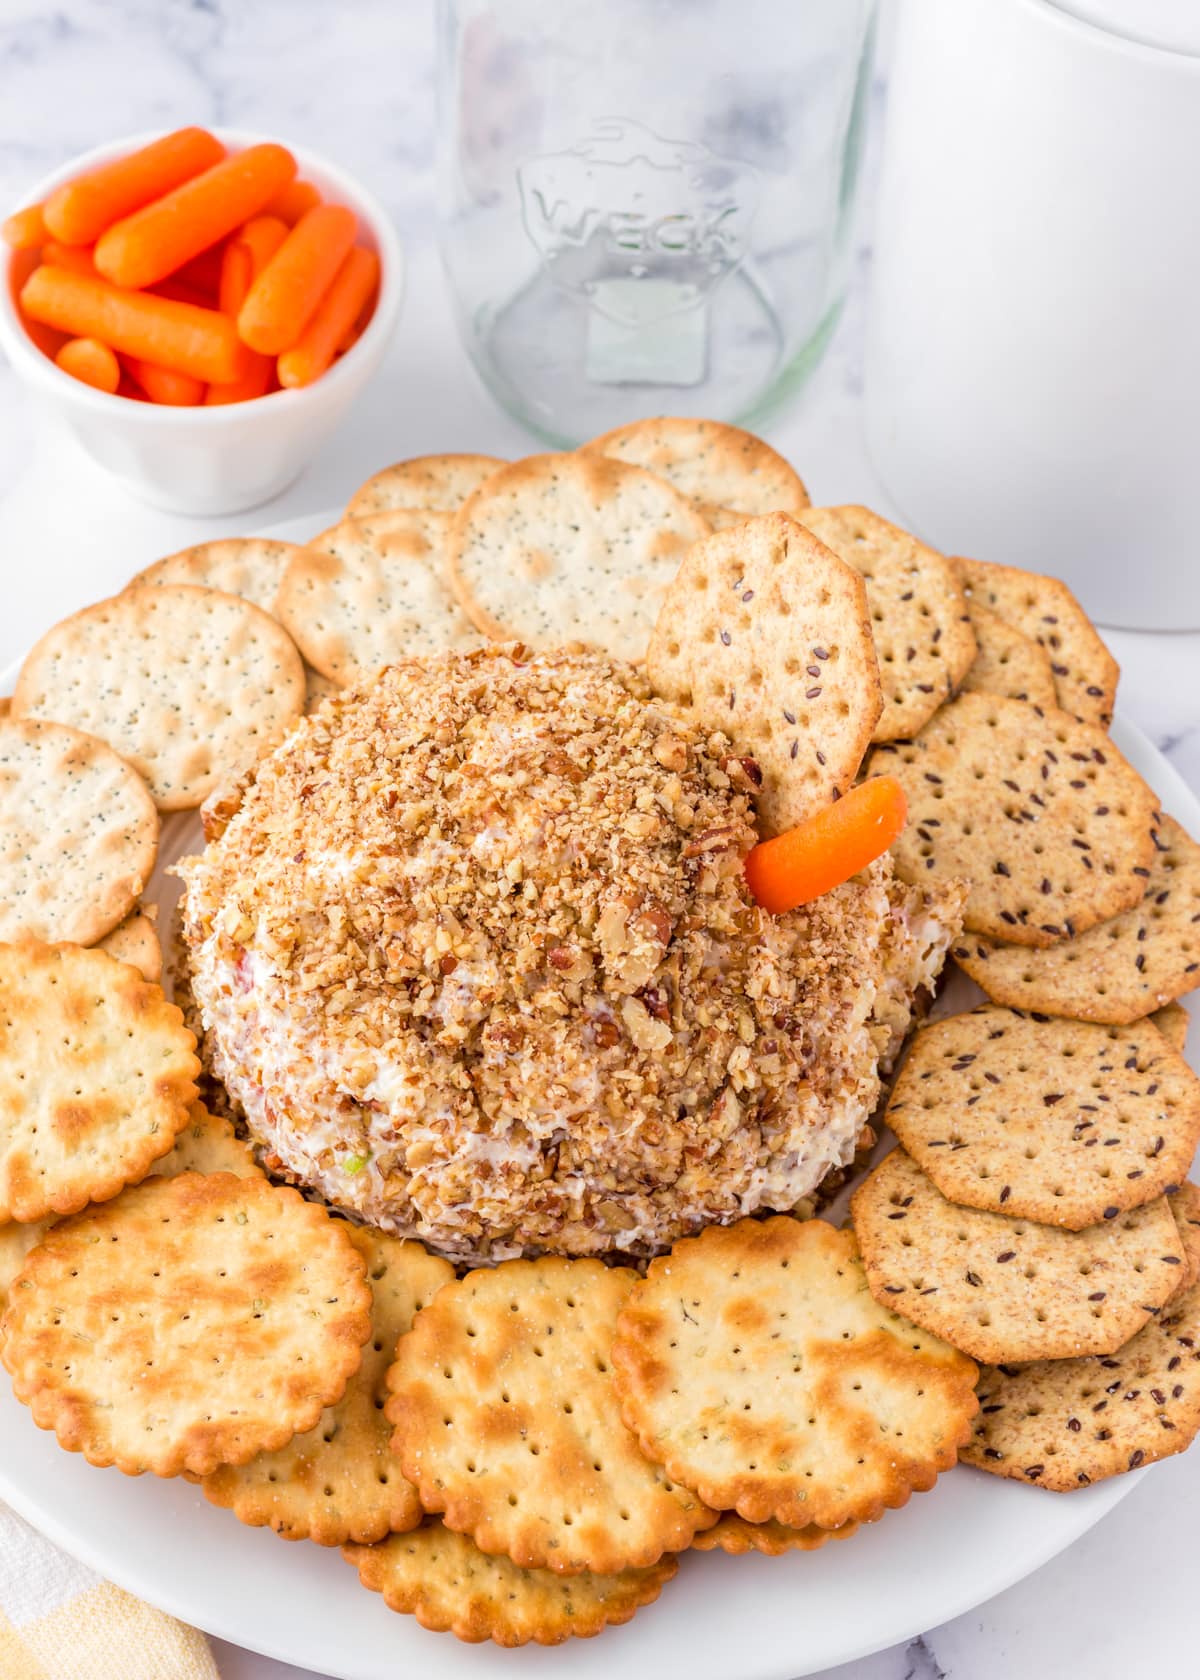 Pineapple cheese ball surrounded by crackers with a carrot stuck in the side.